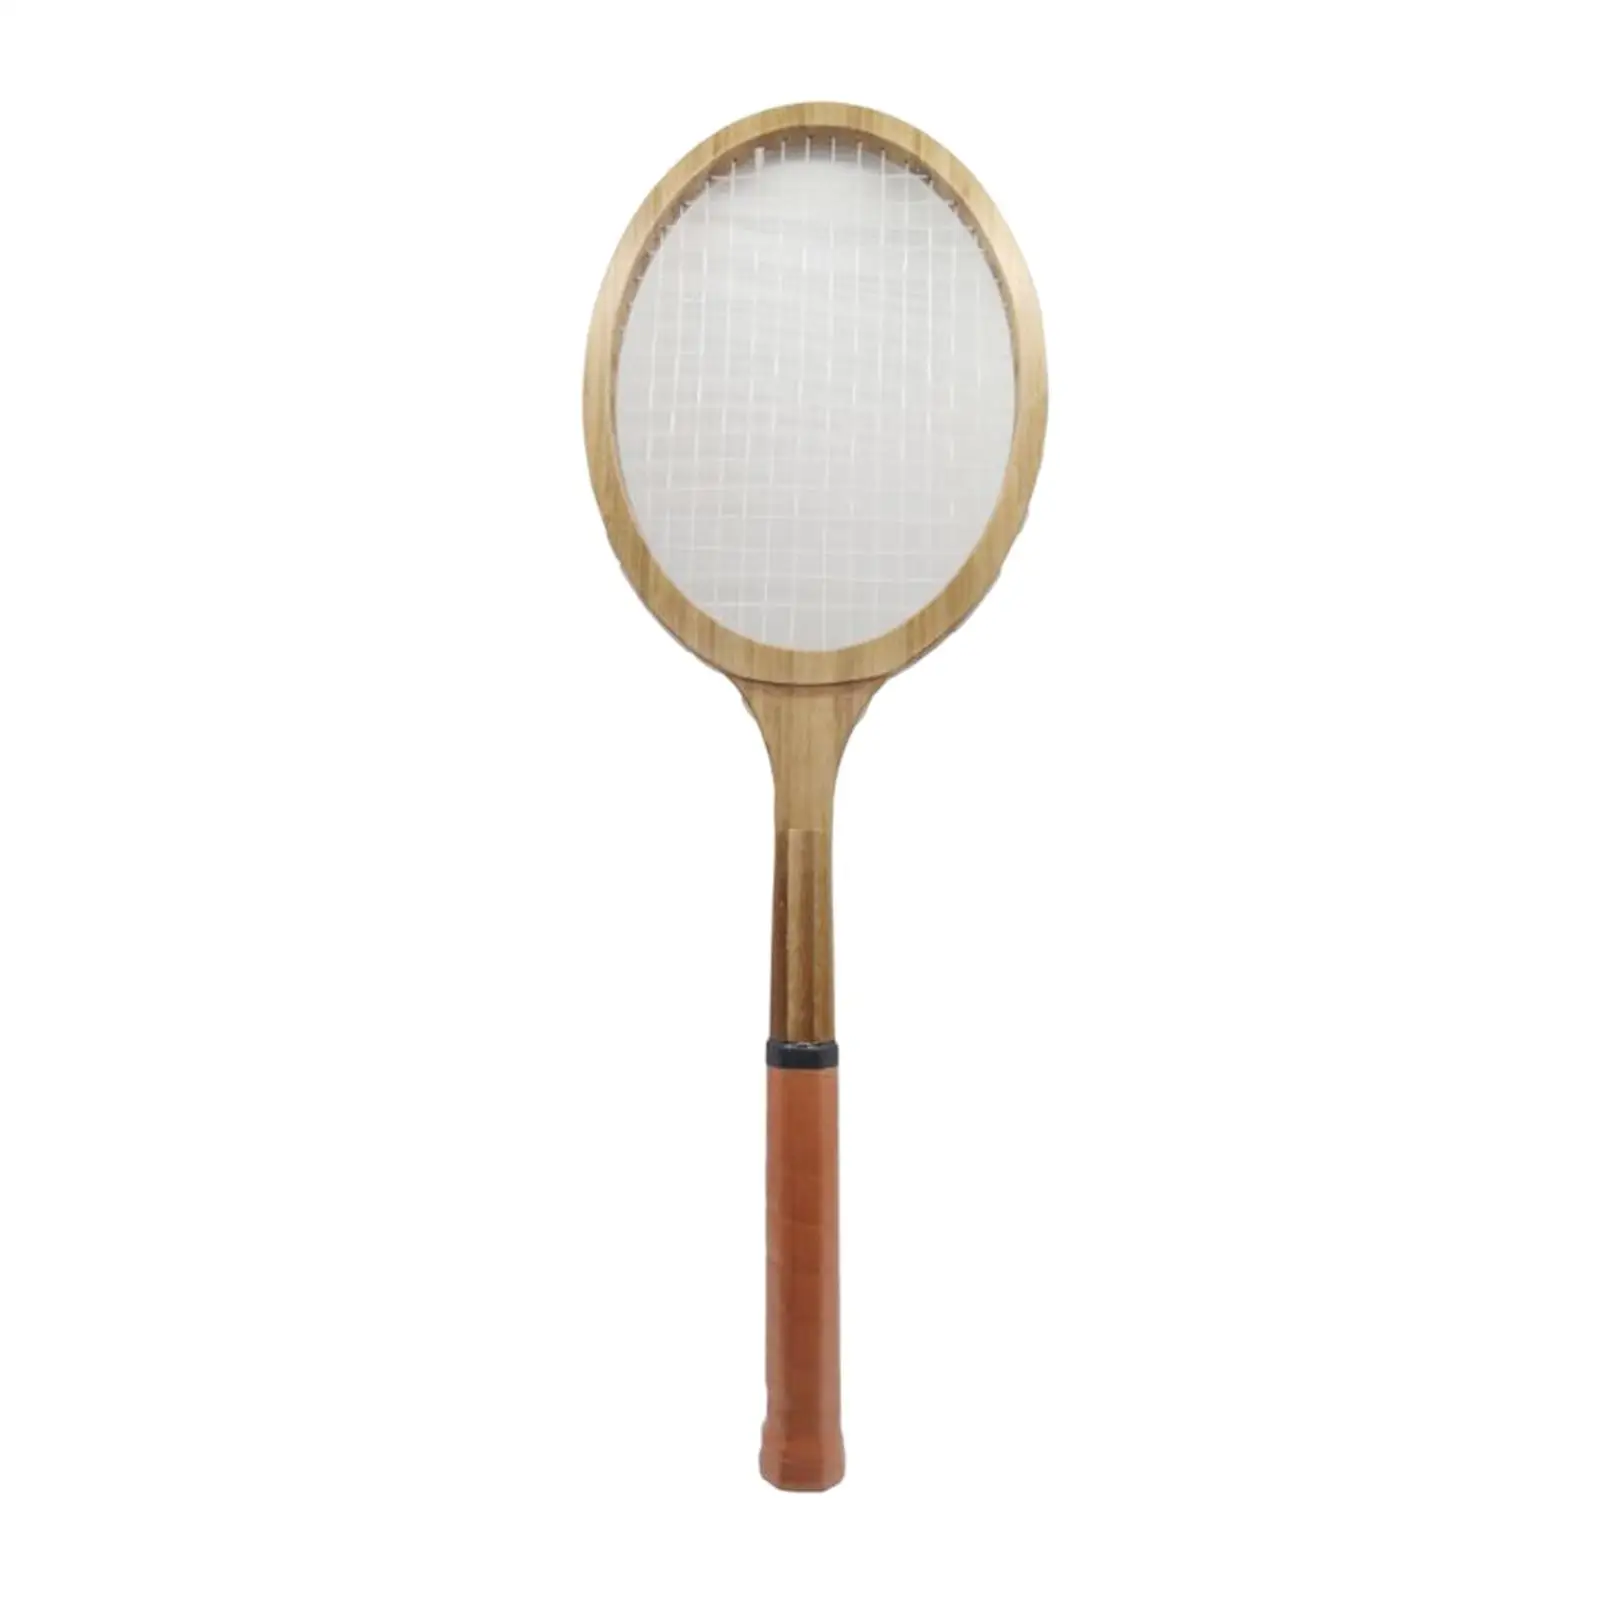 Retro Style Tennis Racquets Family Collectors Gift Wooden Tennis Rackets